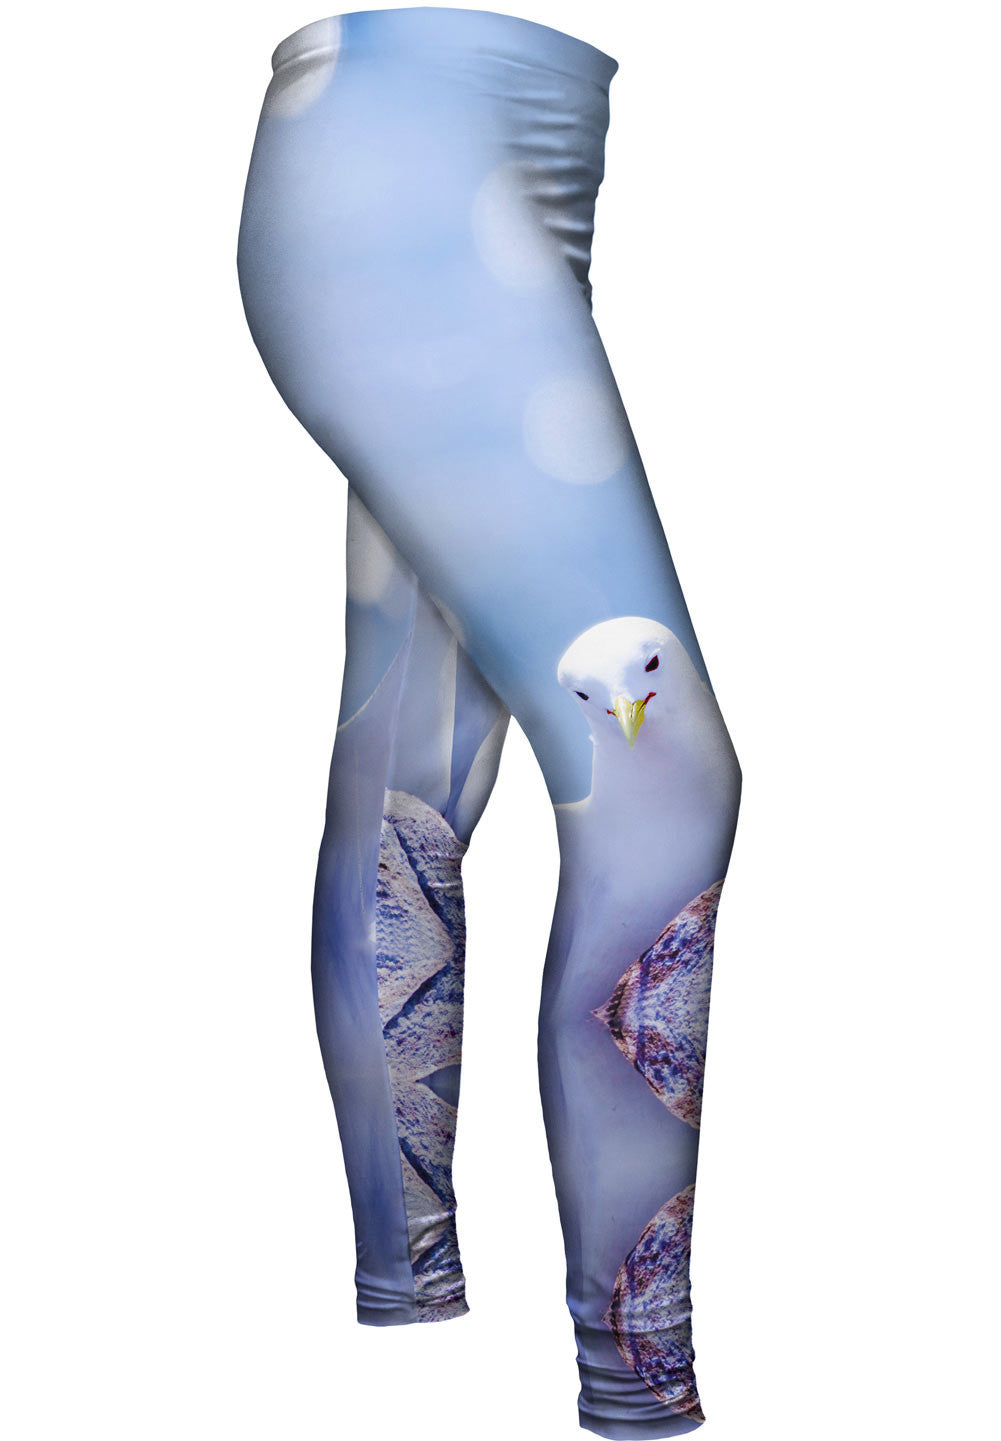 Ladies Fancy Legging - Ladies Fancy Legging buyers, suppliers, importers,  exporters and manufacturers - Latest price and trends